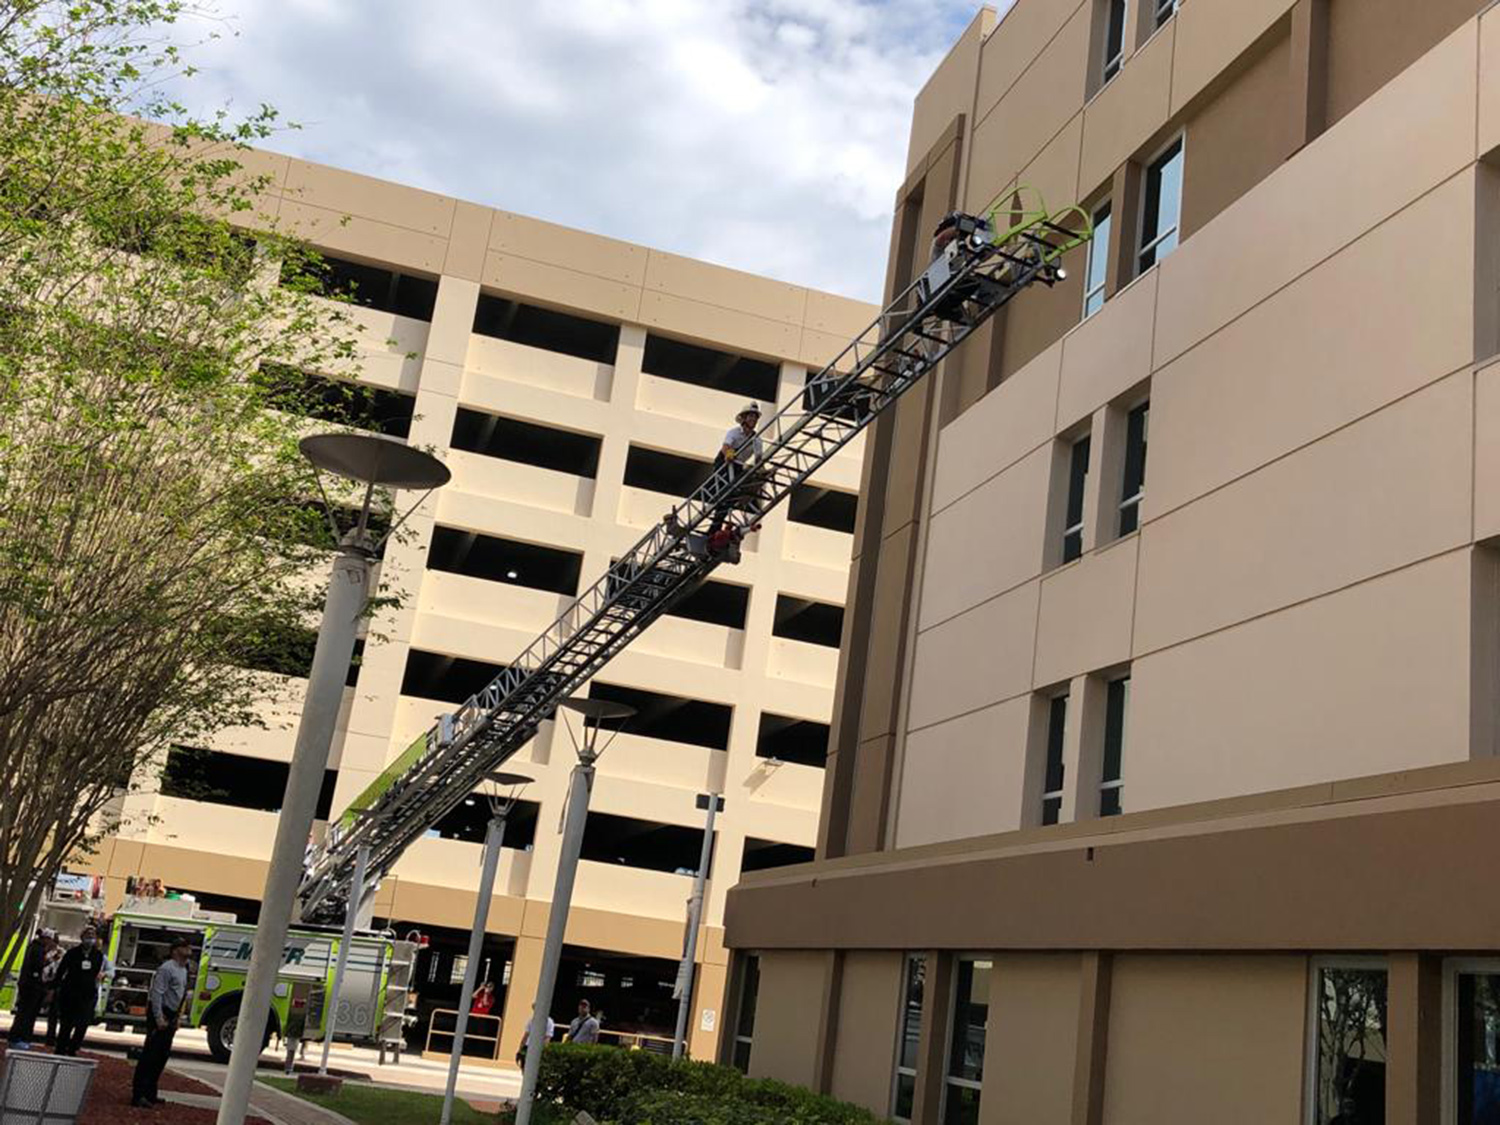 PHOTO: Firefighters climb the ladder from the fire truck to visit with their colleague through the fourth floor window of a hospital in Miami-Dade County, Fla., April 3, 2020.